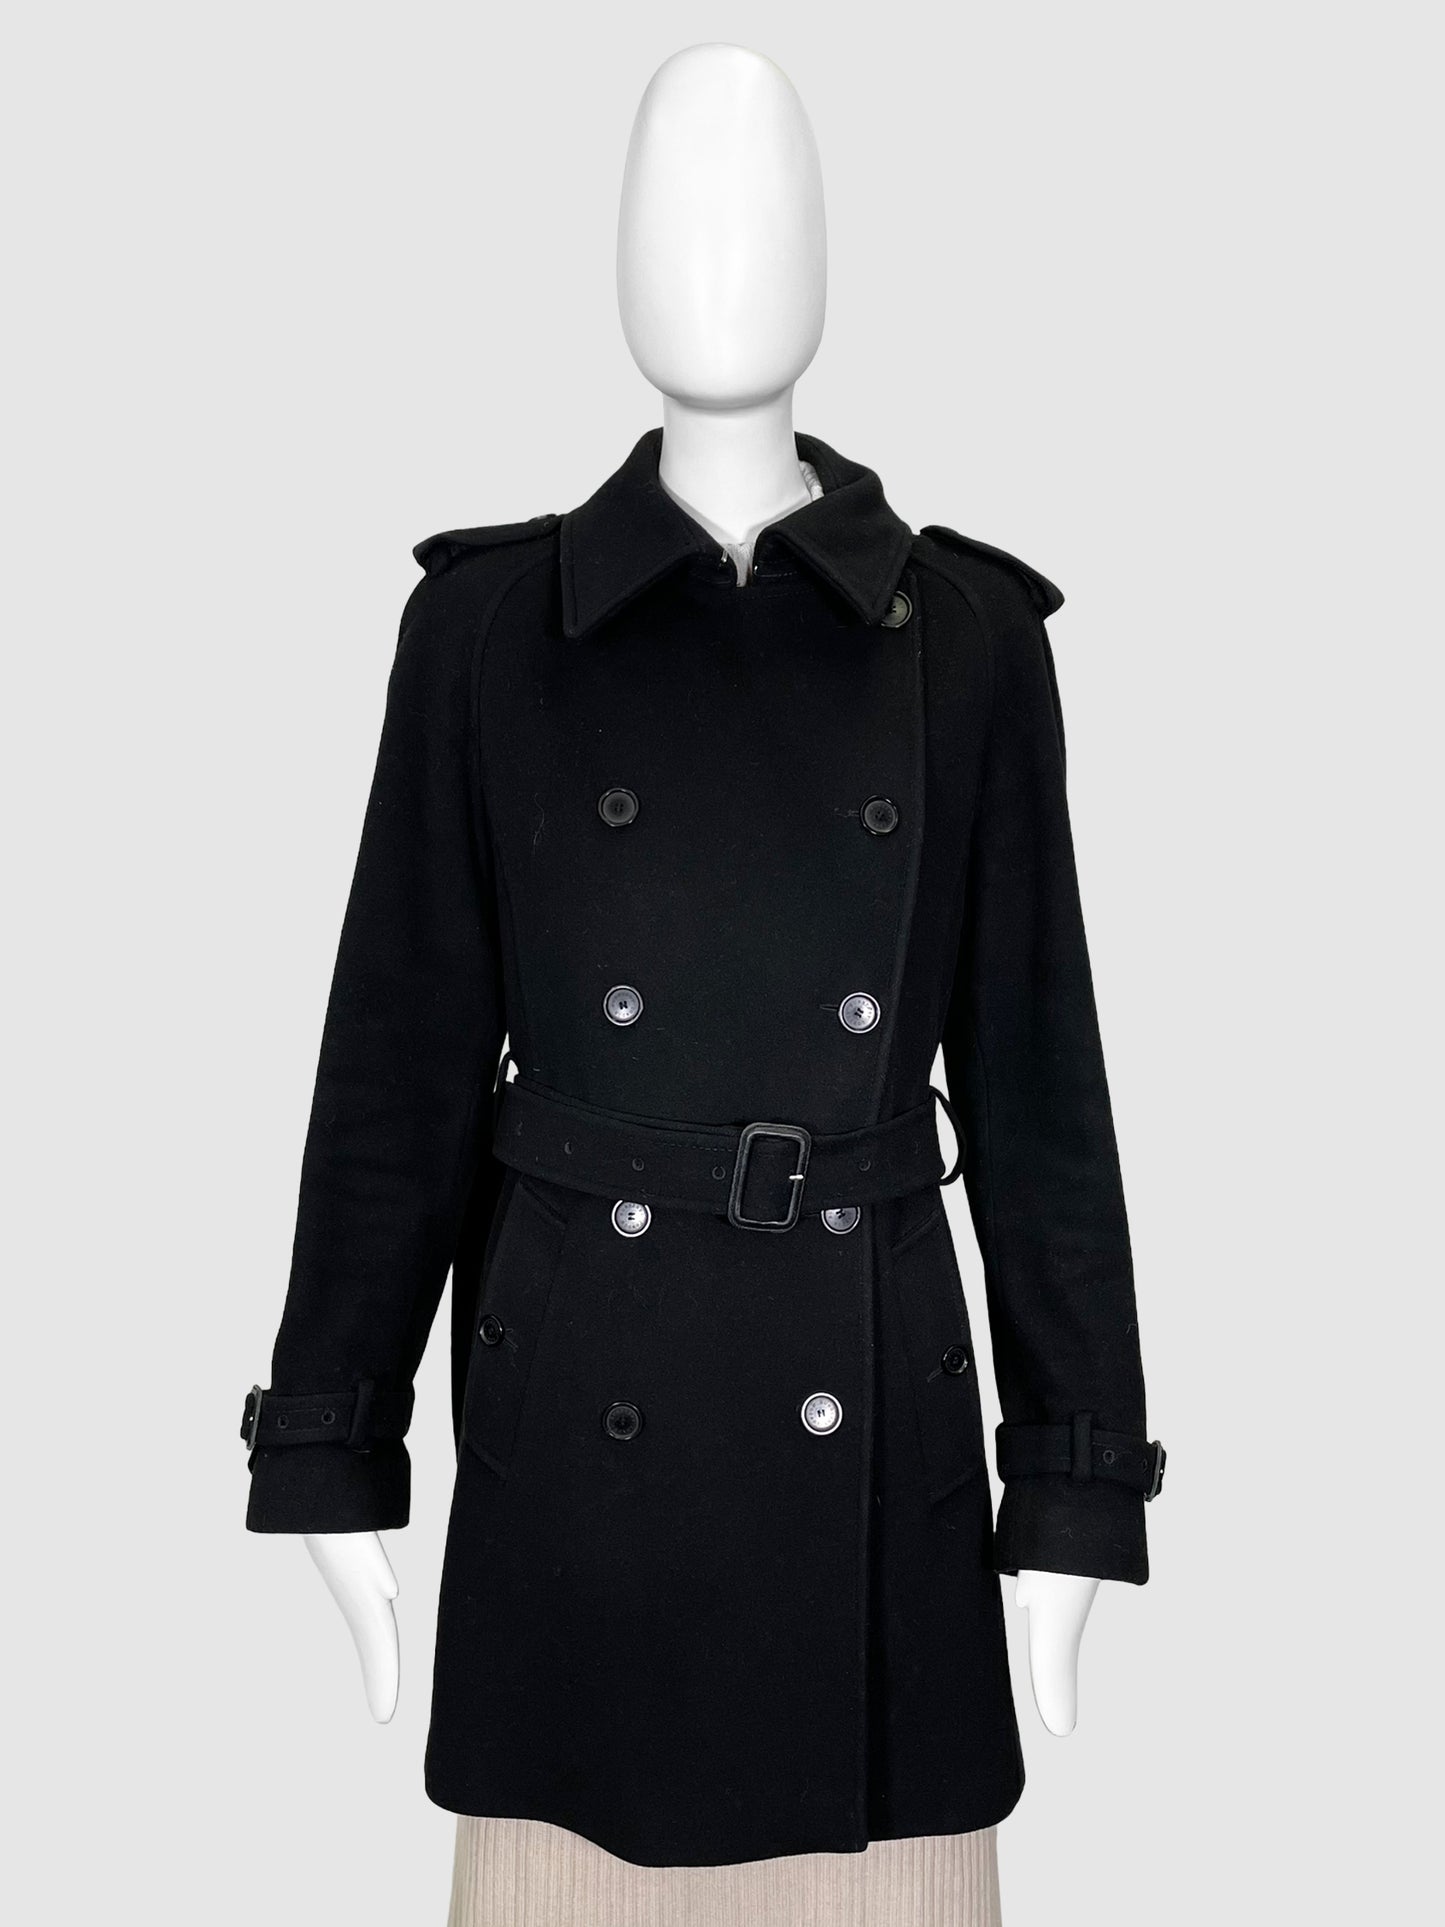 Burberry Wool Double-Breasted Coat - Size 10